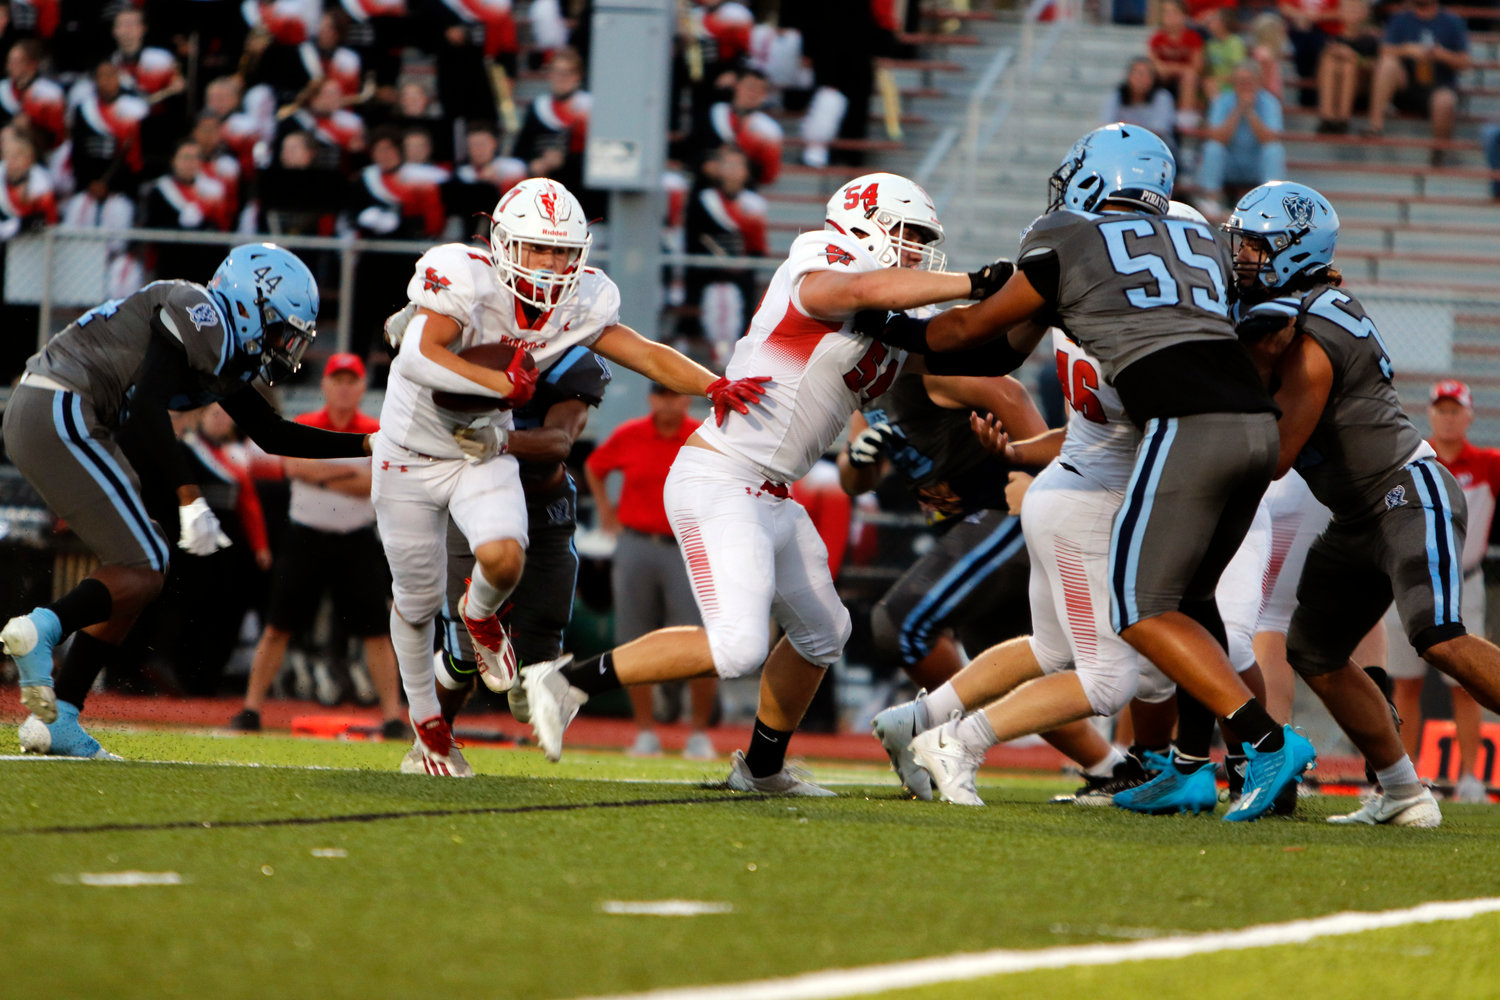 Warrenton running back Austin Haas carries the ball during the first half of Friday’s game.